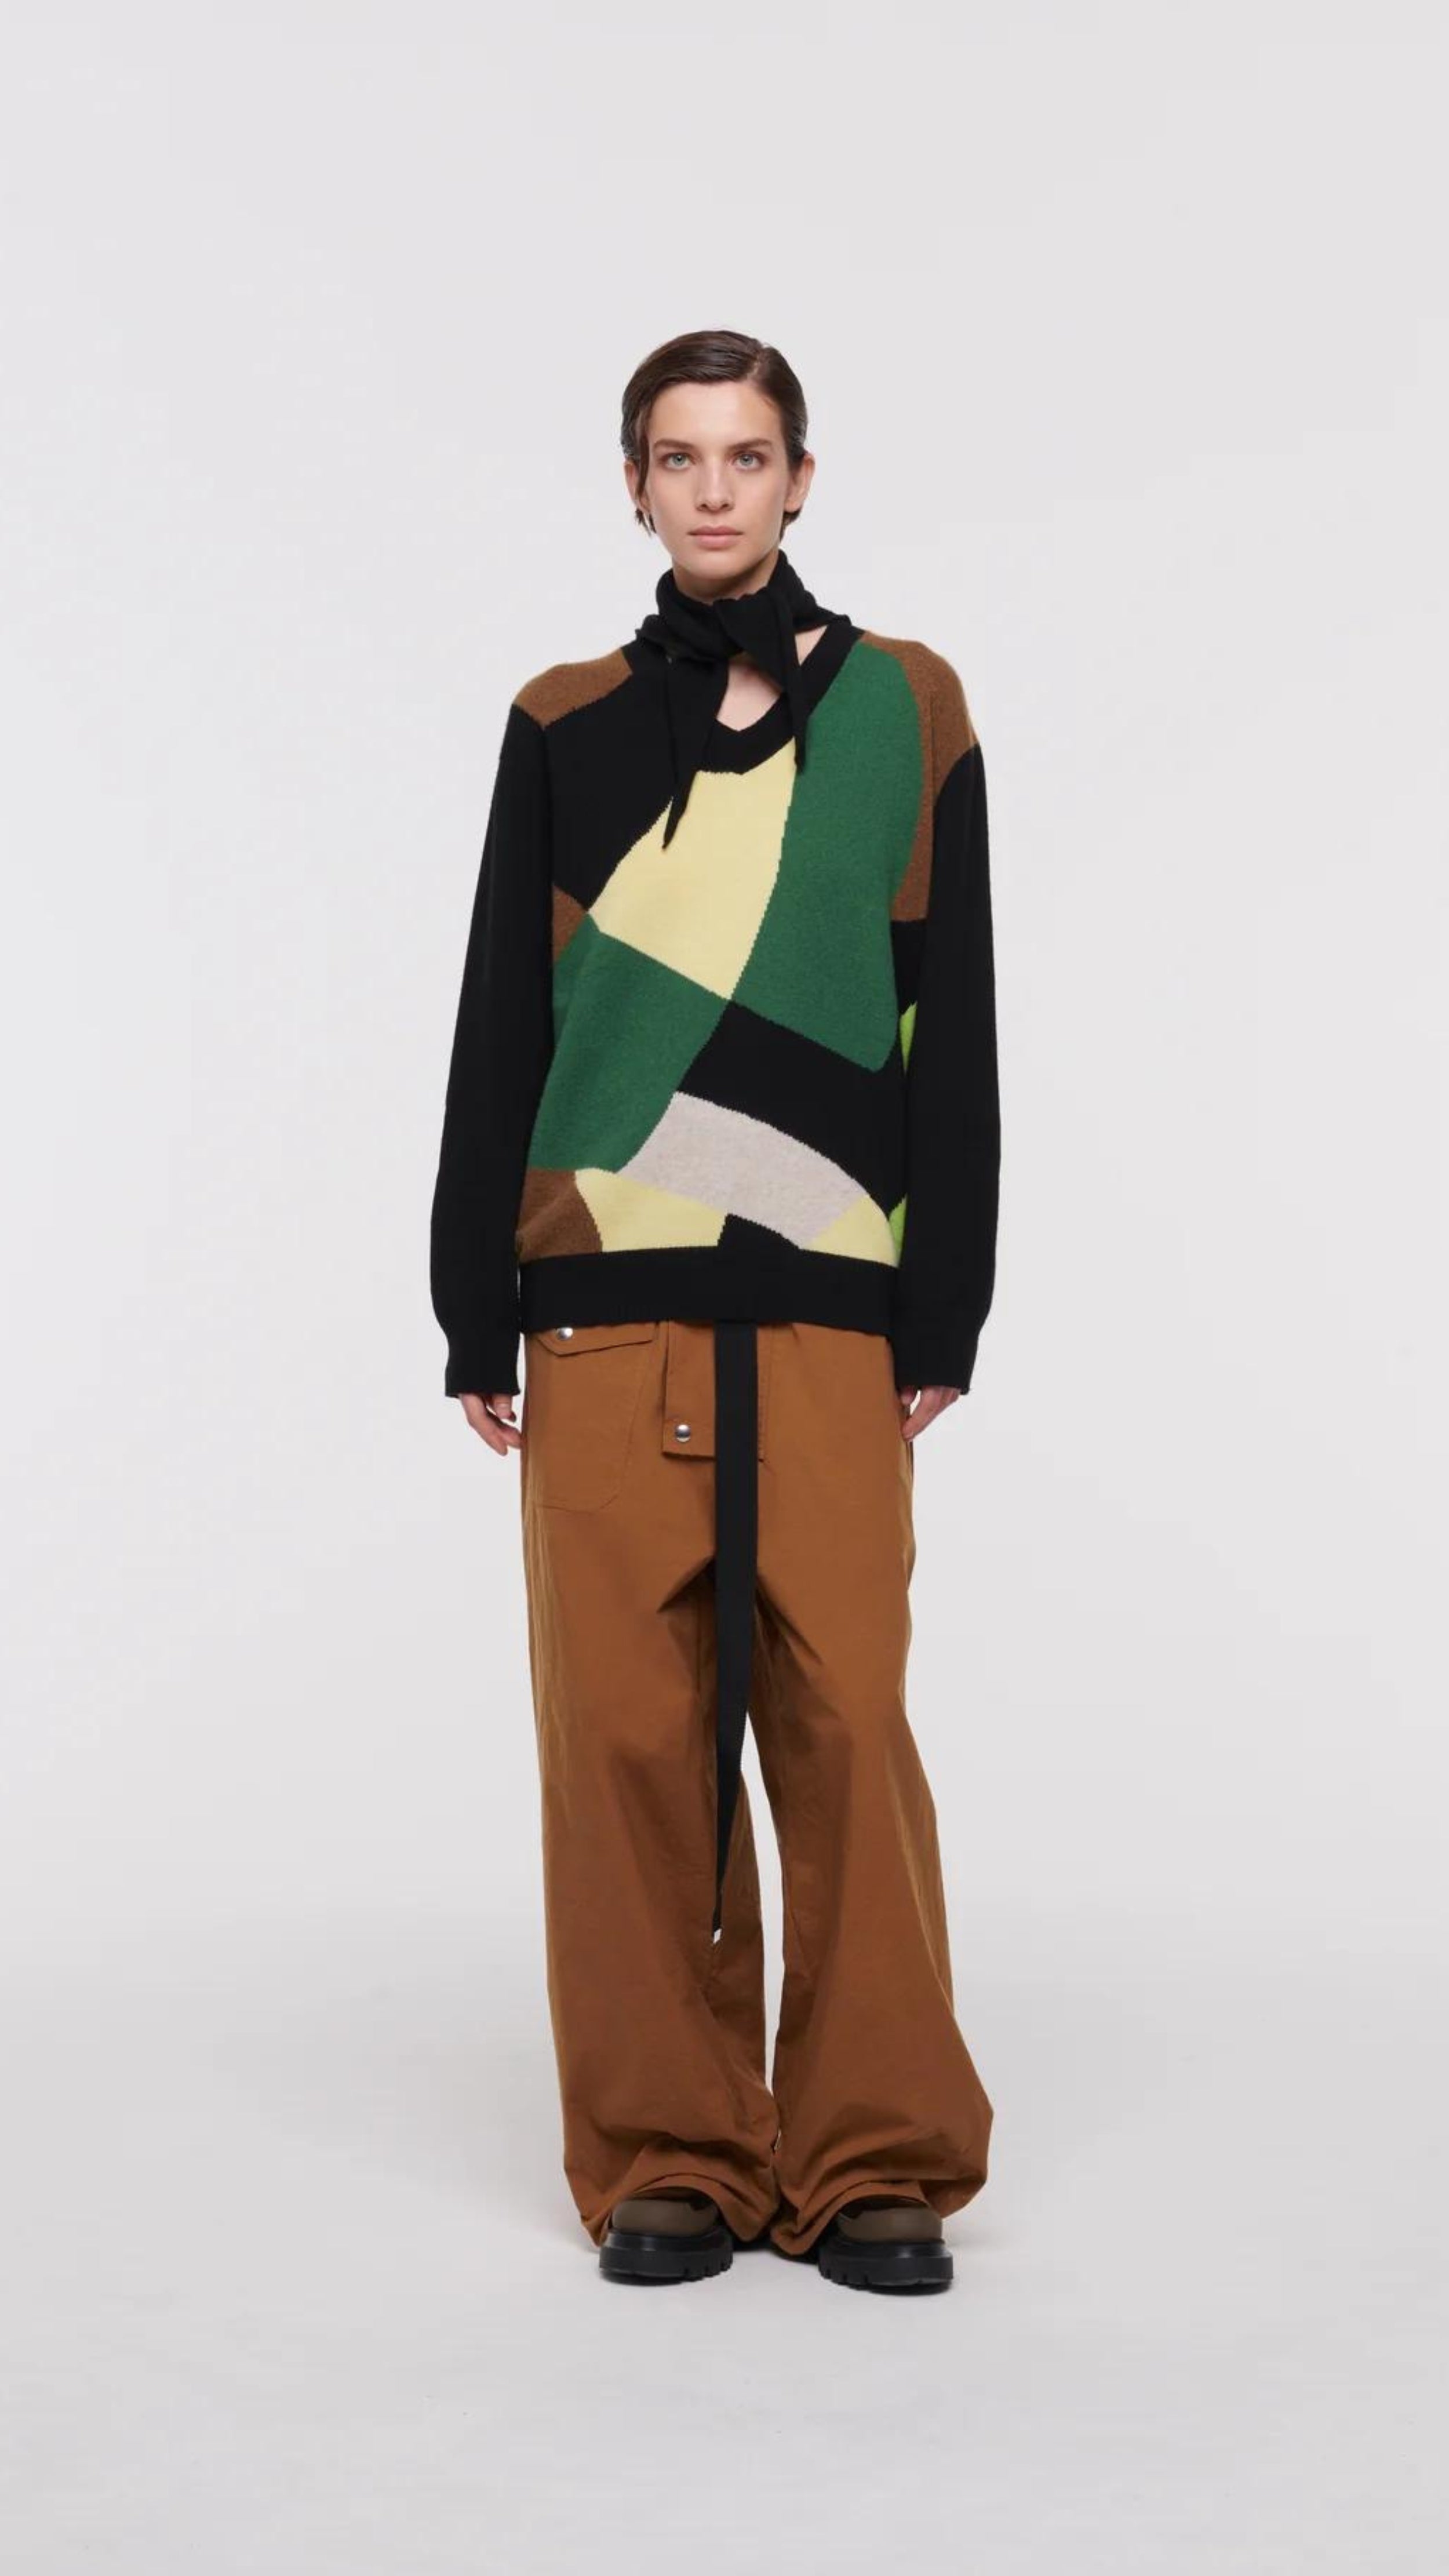 Plan C Color Block Sweater with Scarf. Wool and cashmere blend sweater made in Italy. With Green, pale yellow, ecru and black geometric patterns across the front and a sold black back. Comes with a built in scarf that can be worn tied or open. Shown on model facing front.